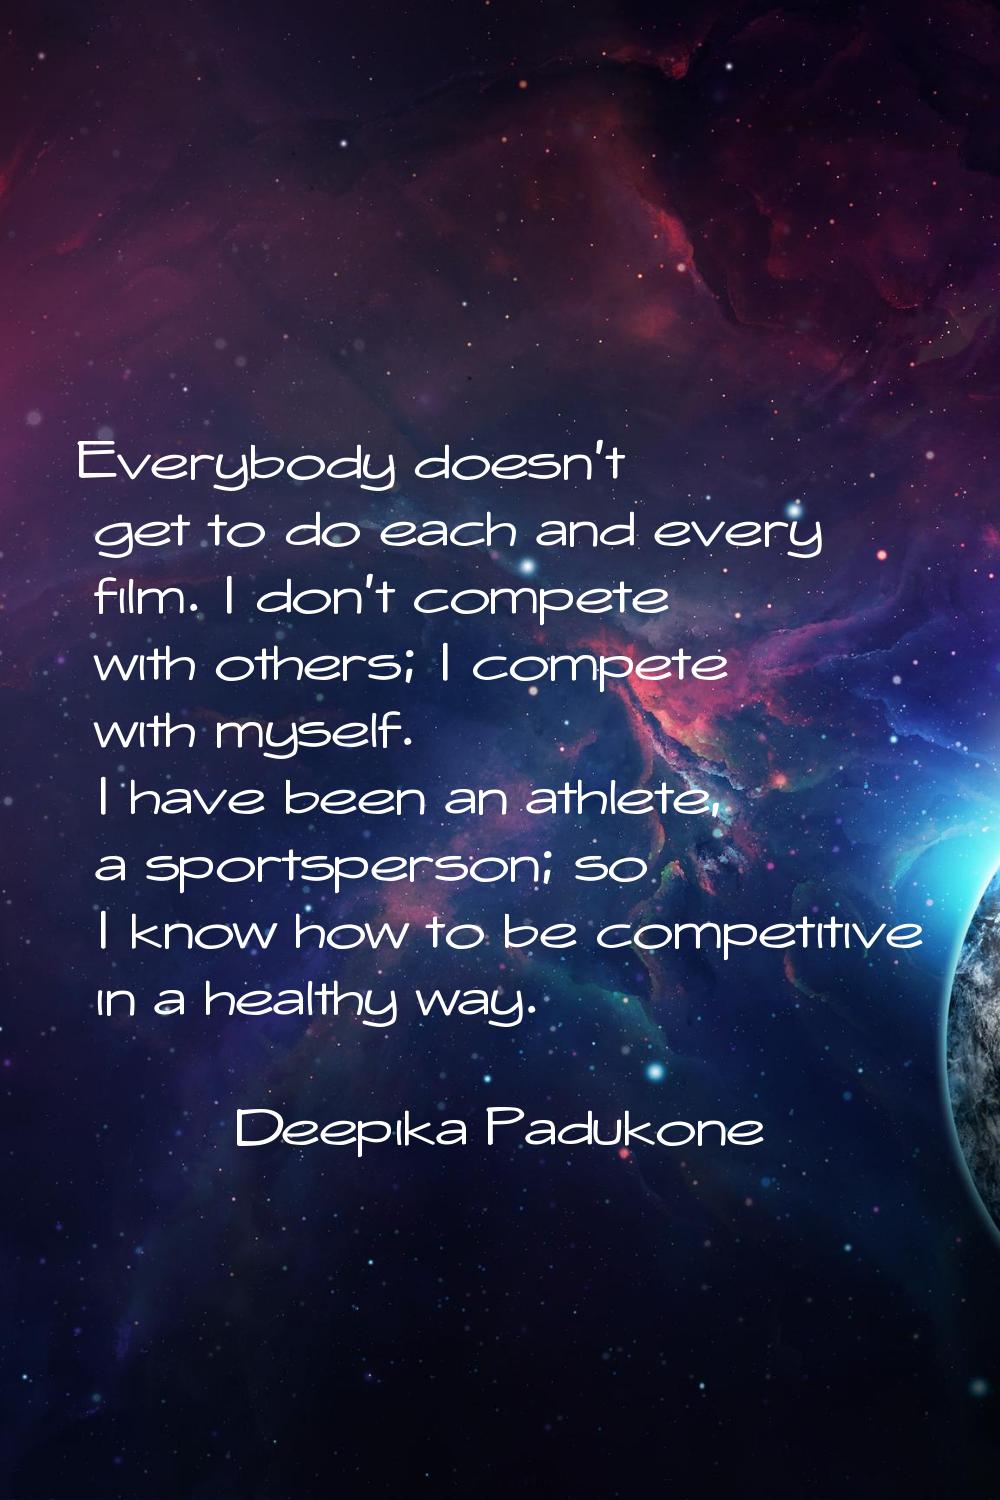 Everybody doesn't get to do each and every film. I don't compete with others; I compete with myself